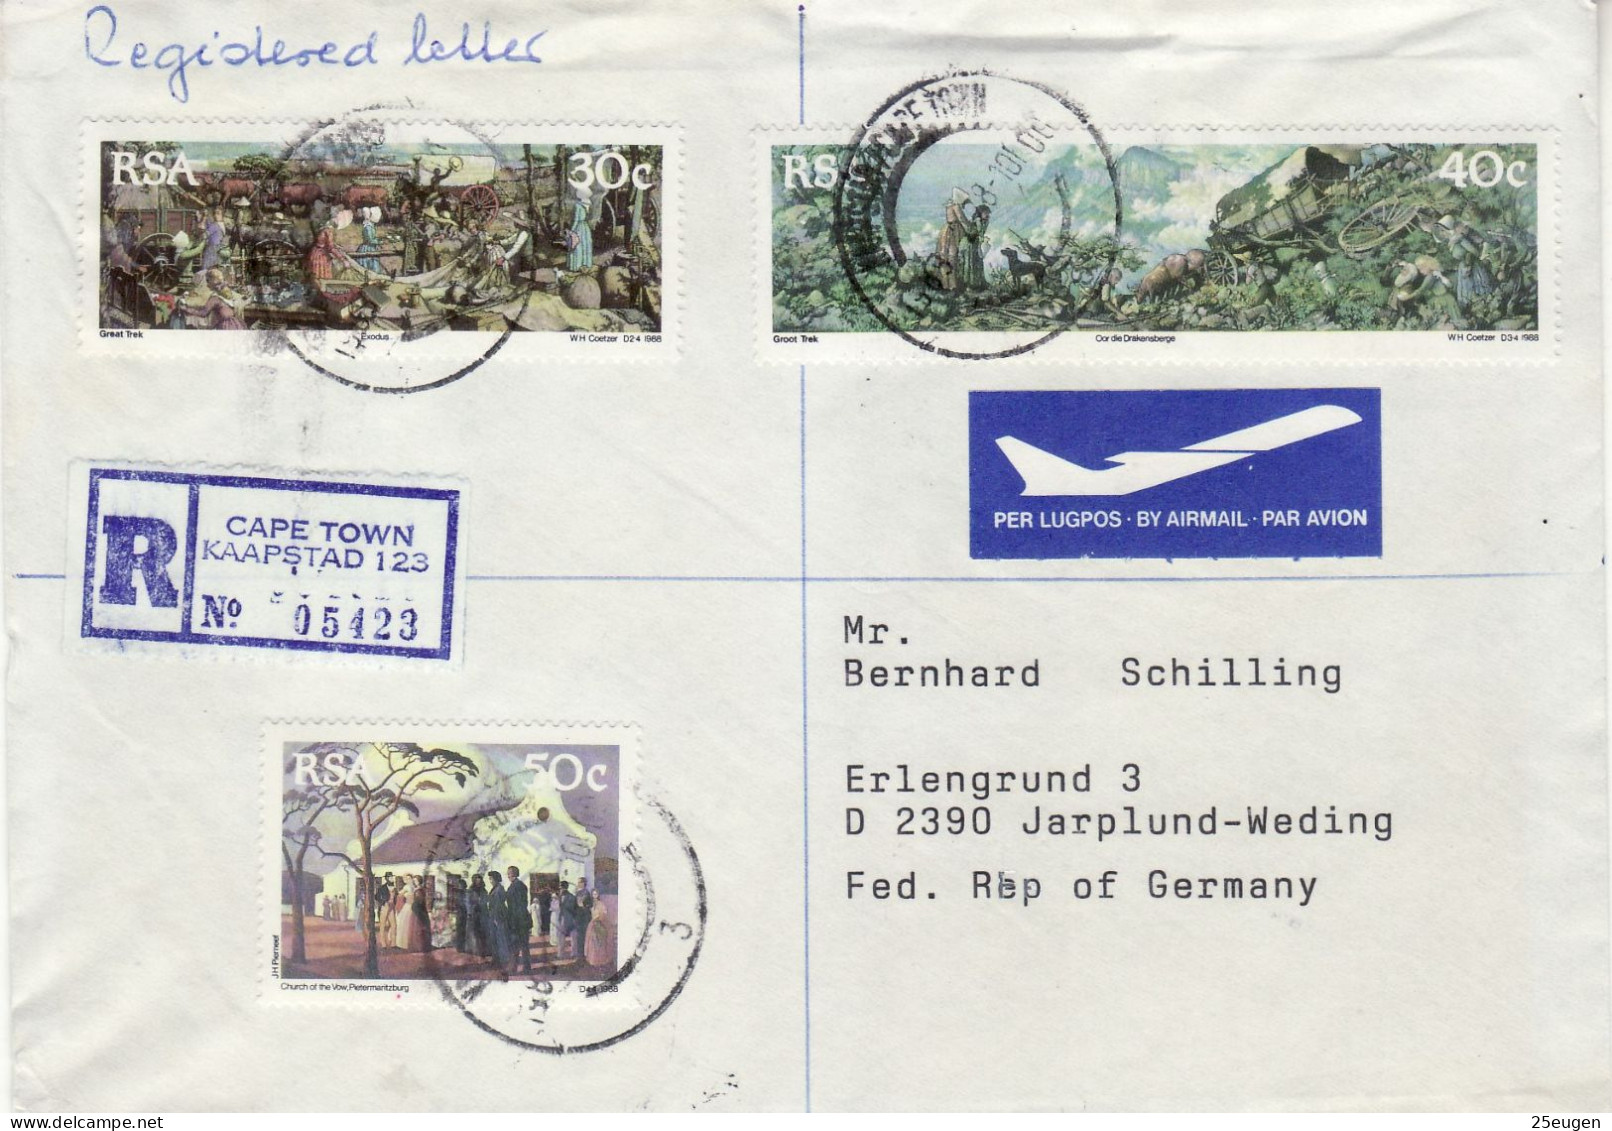 SOUTH AFRICA 1989  AIRMAIL R - LETTER SENT TO JARPLUND - Covers & Documents